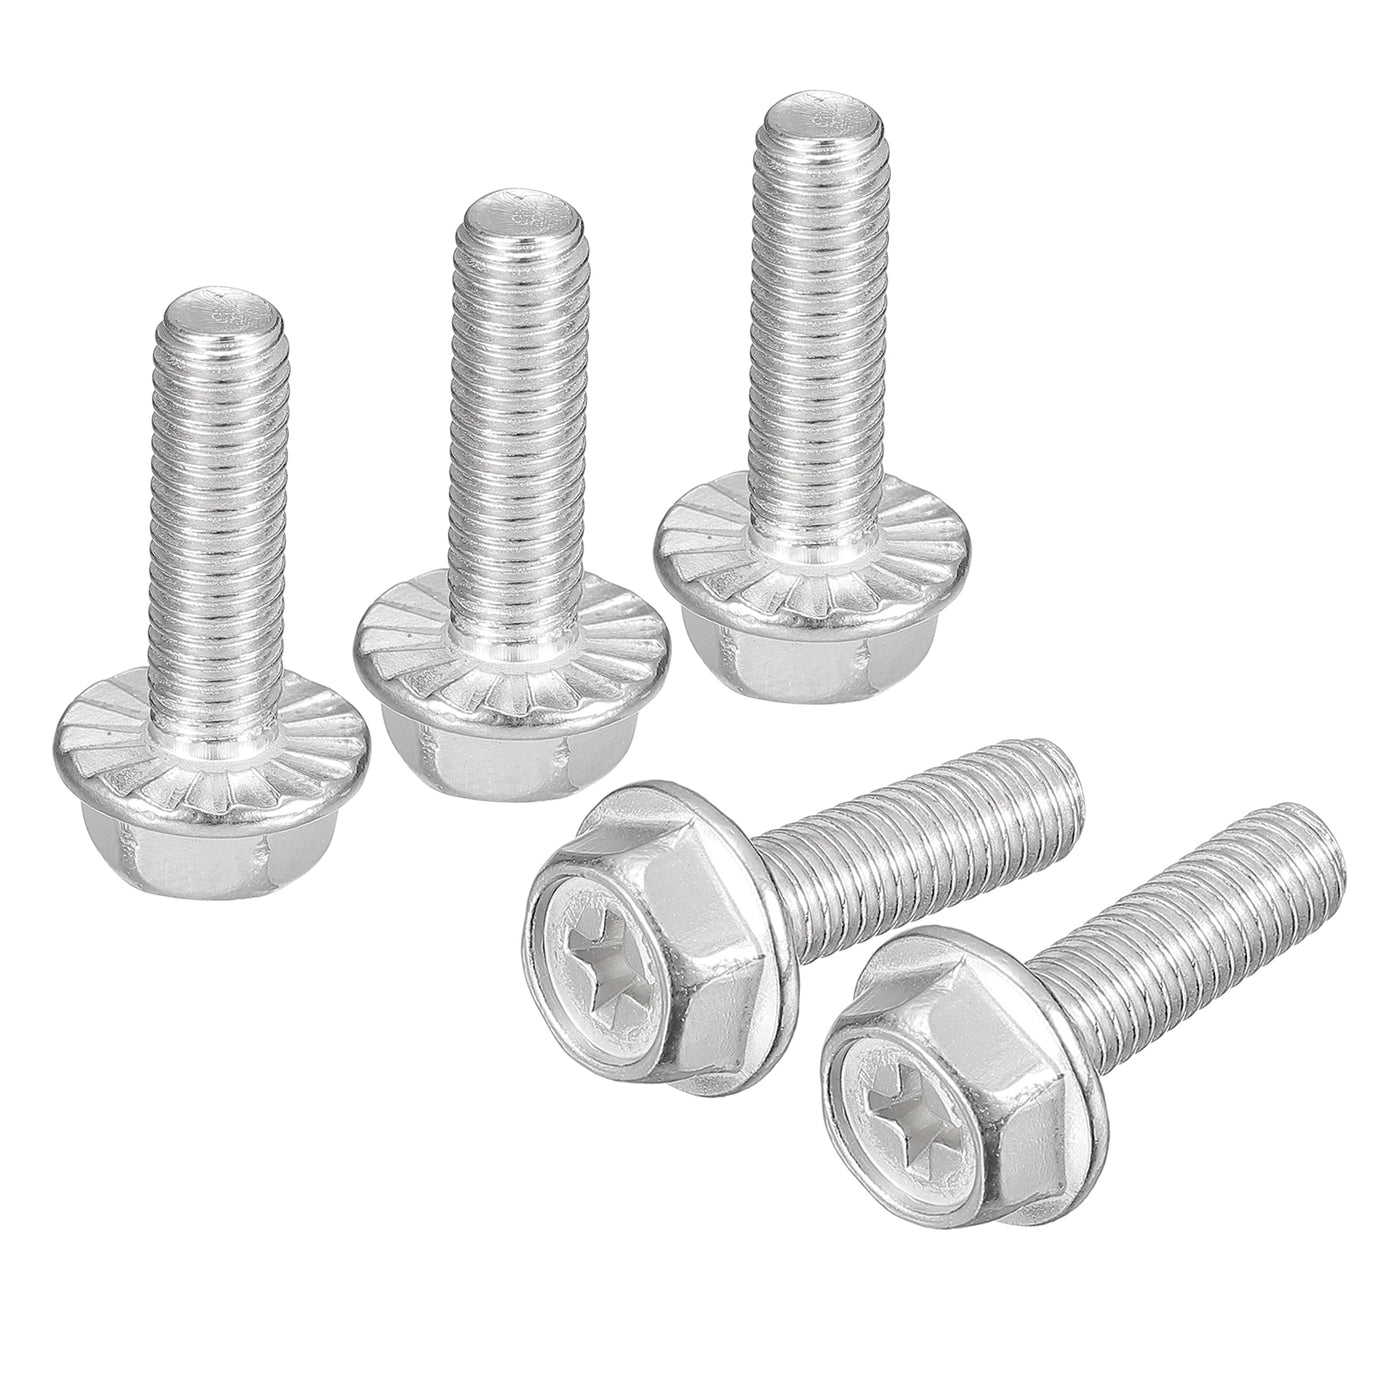 uxcell Uxcell M6x20mm Phillips Hex Head Flange Bolts, 20pcs 304 Stainless Steel Screws